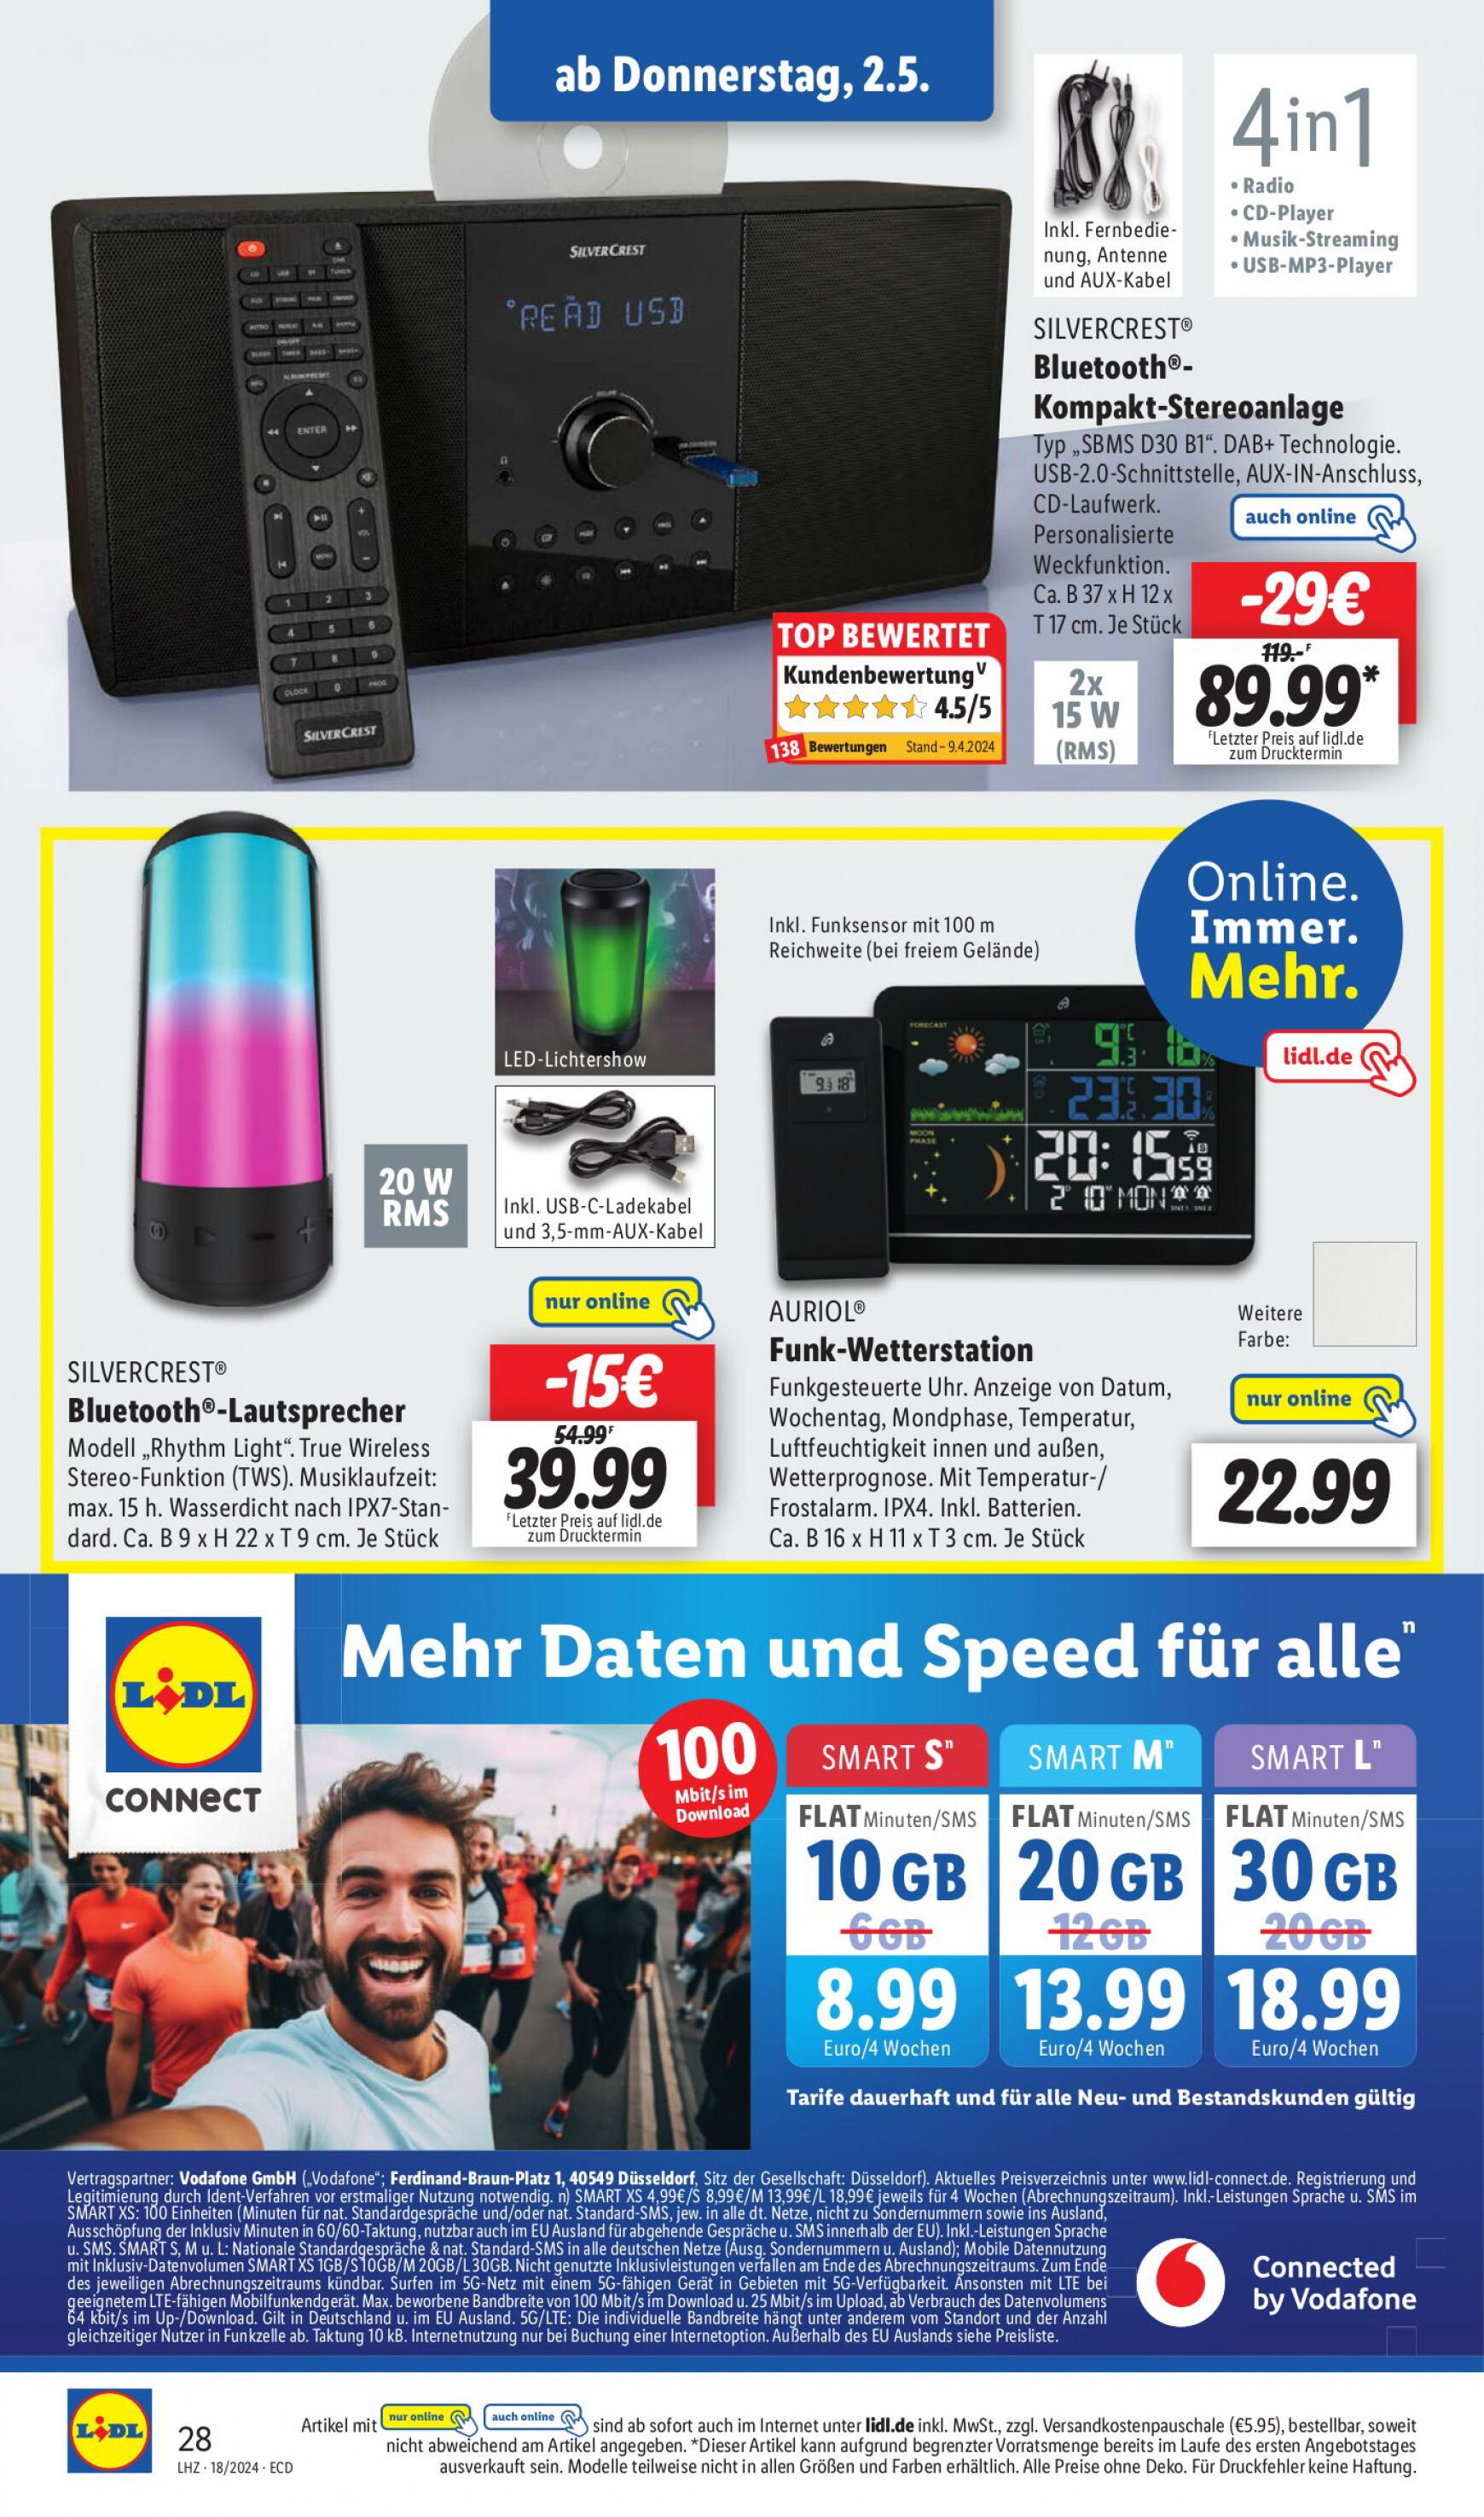 lidl - Flyer Lidl aktuell 29.04. - 04.05. - page: 32